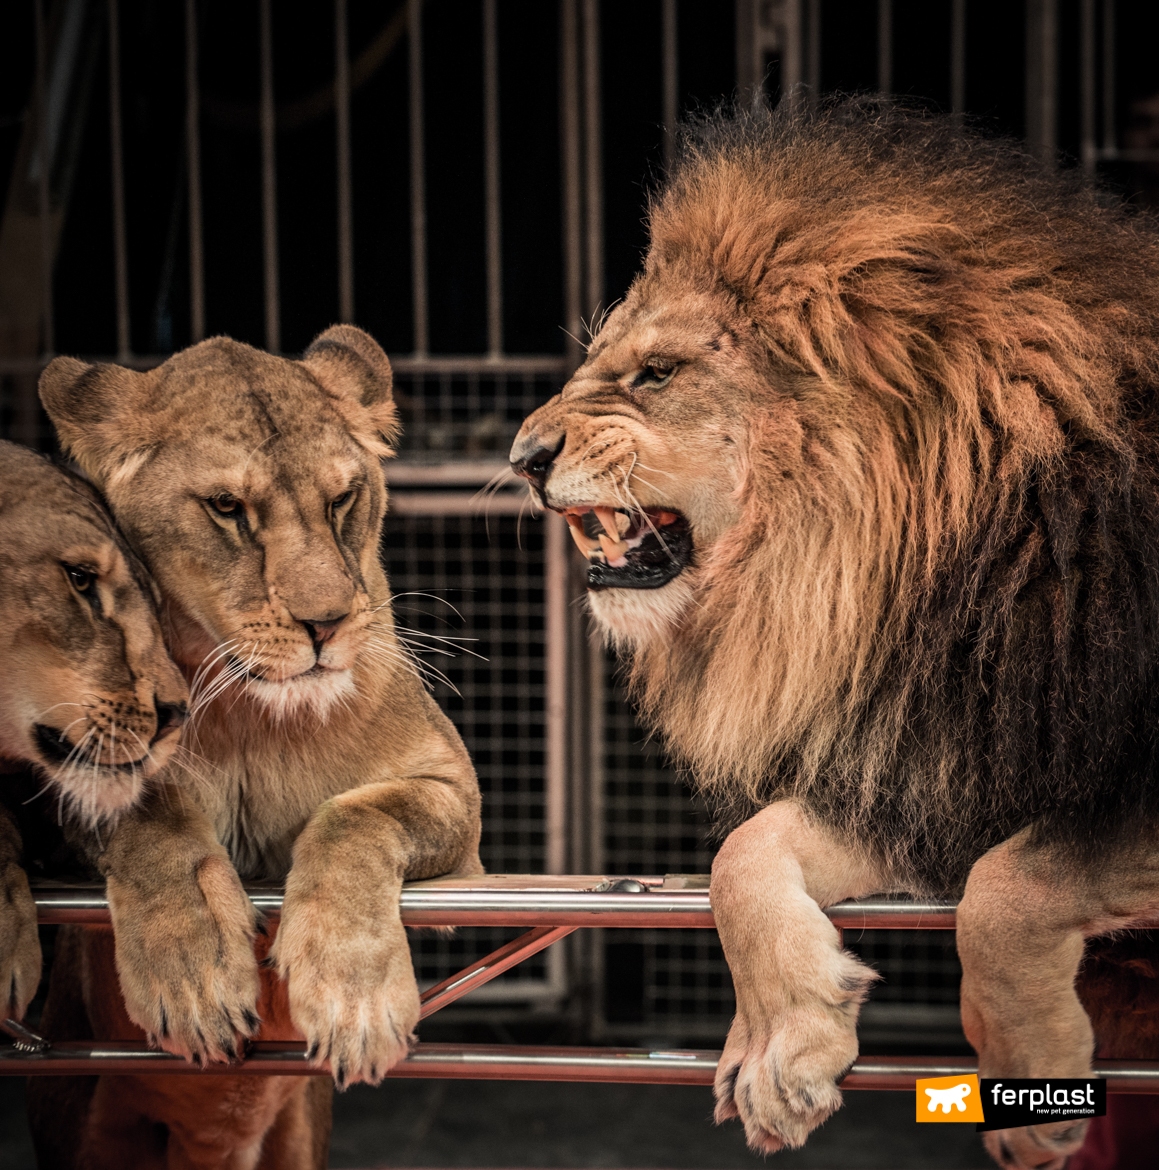 Lions in circus